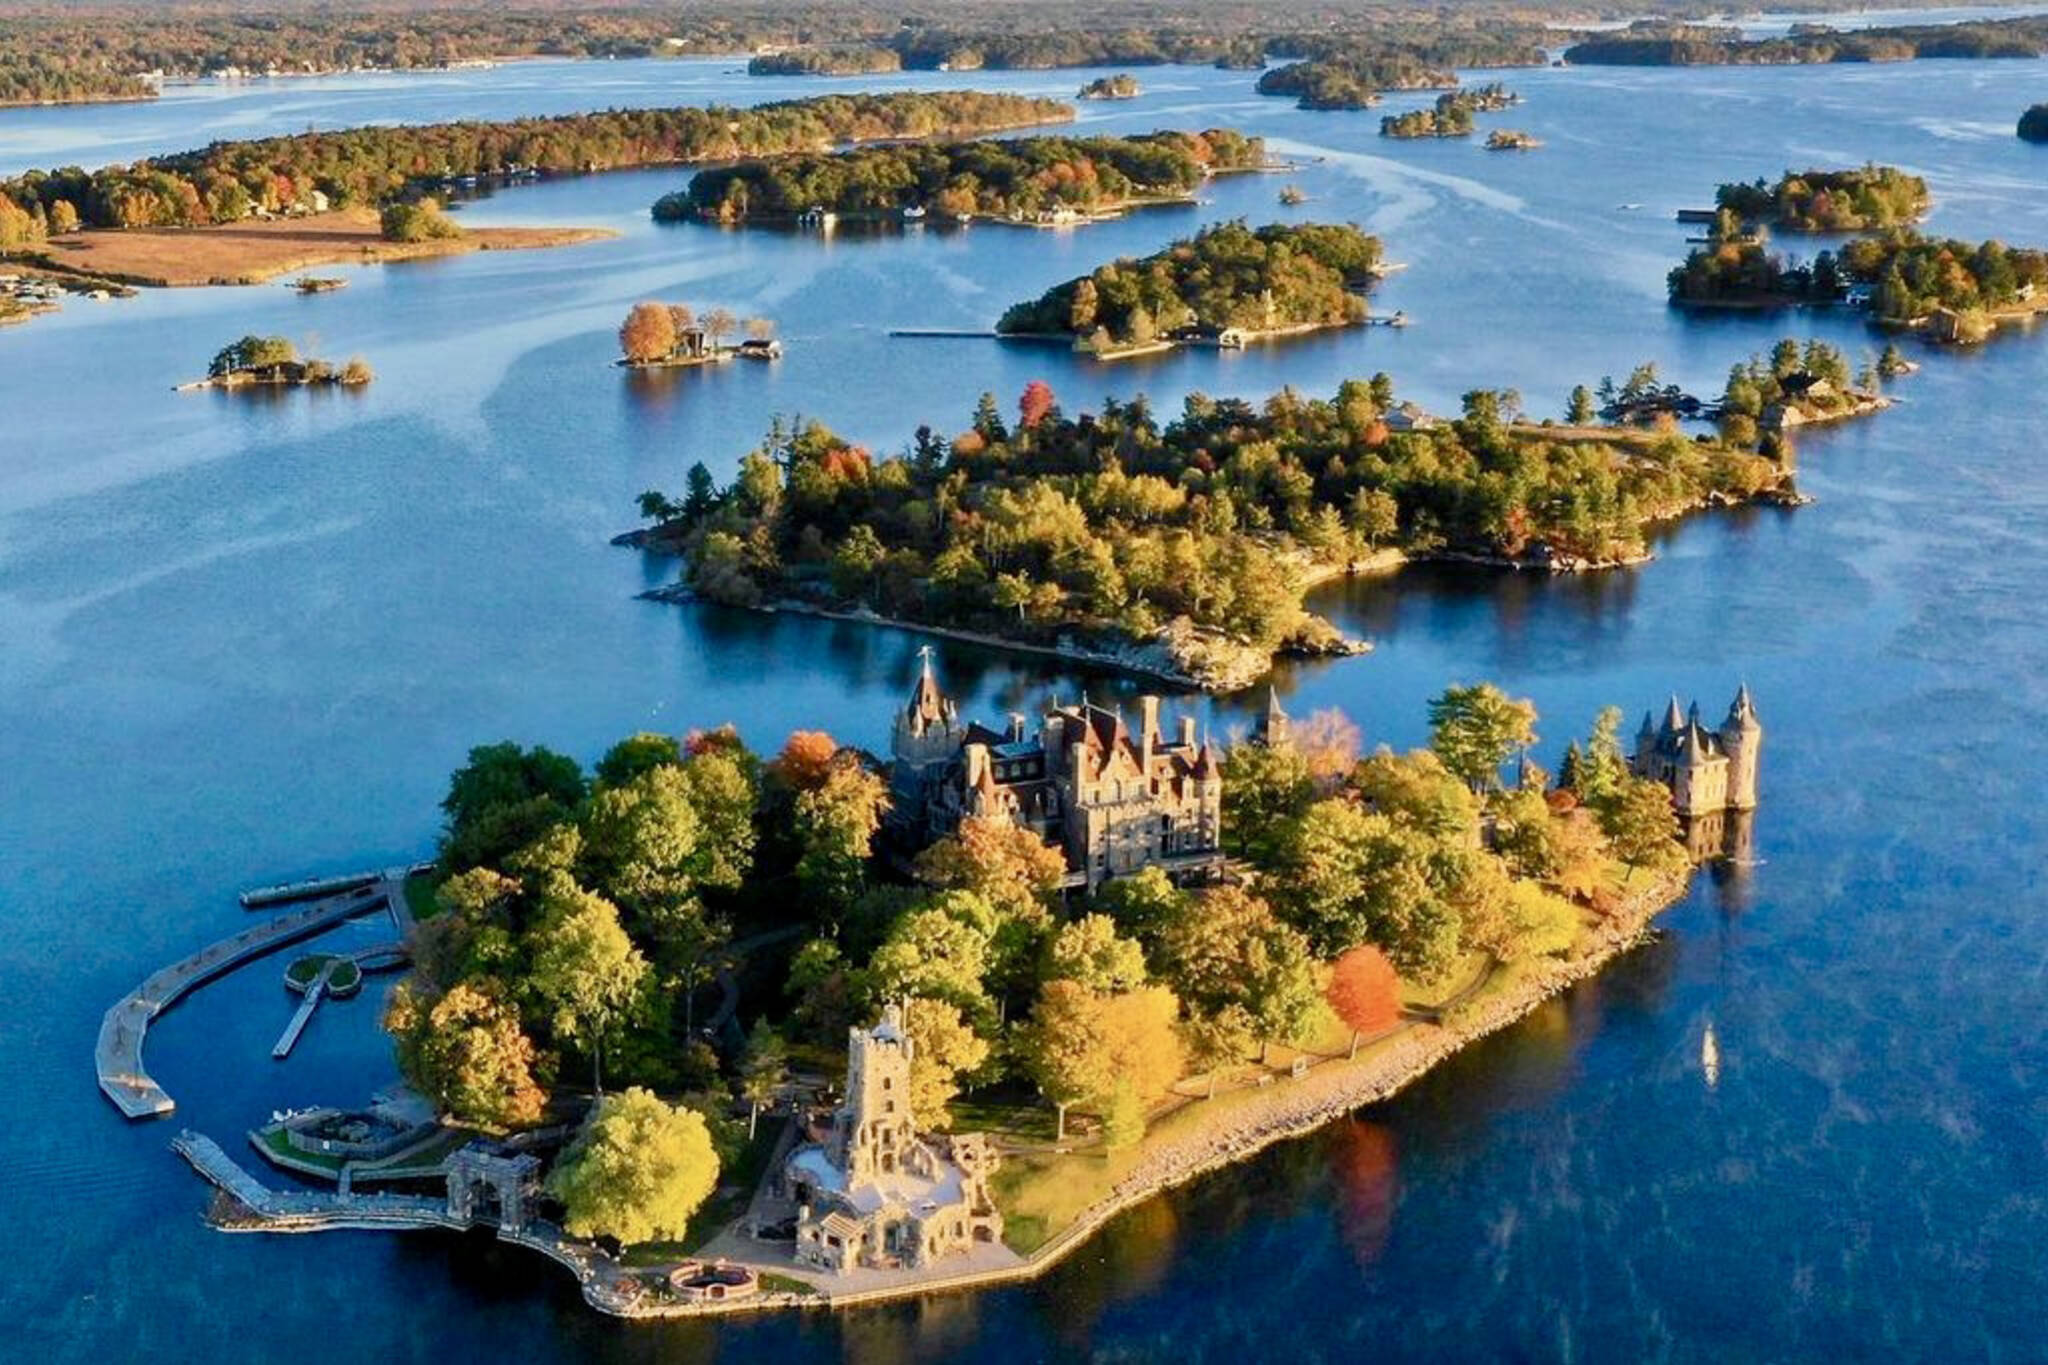 The 1000 Islands National Park is an overlooked natural wonder in Ontario